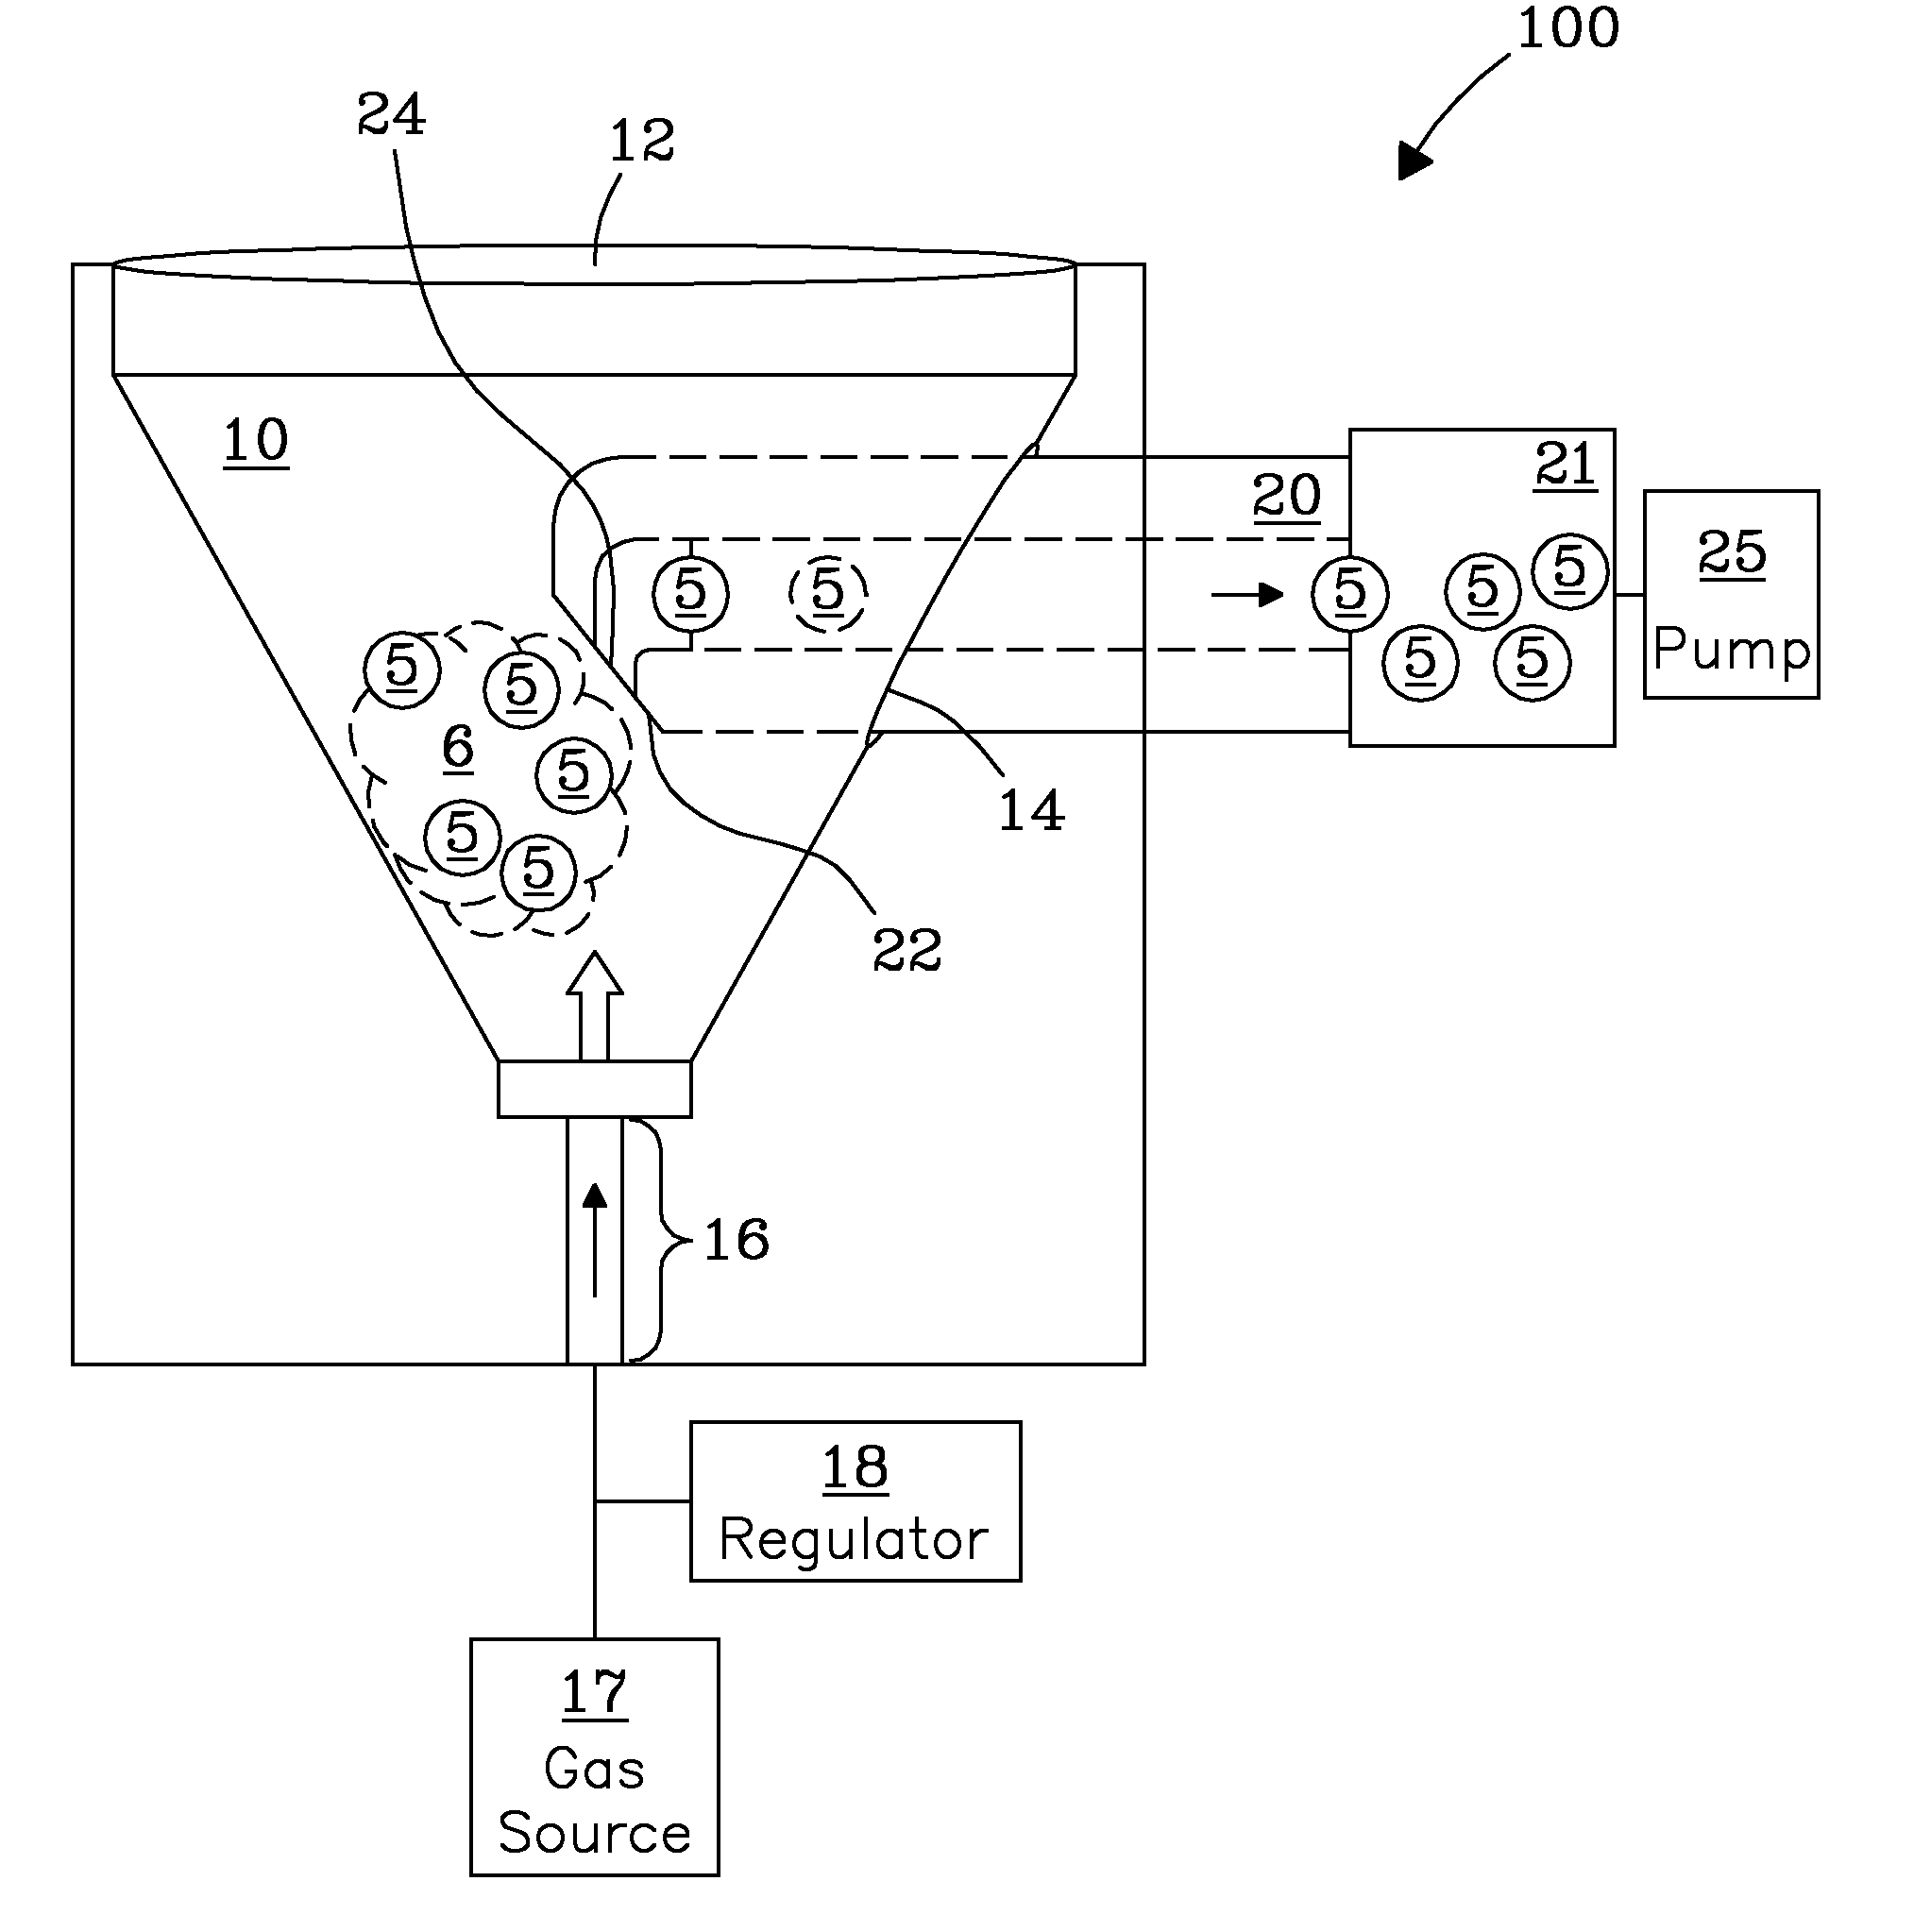 Article separation apparatus and method for unit operations